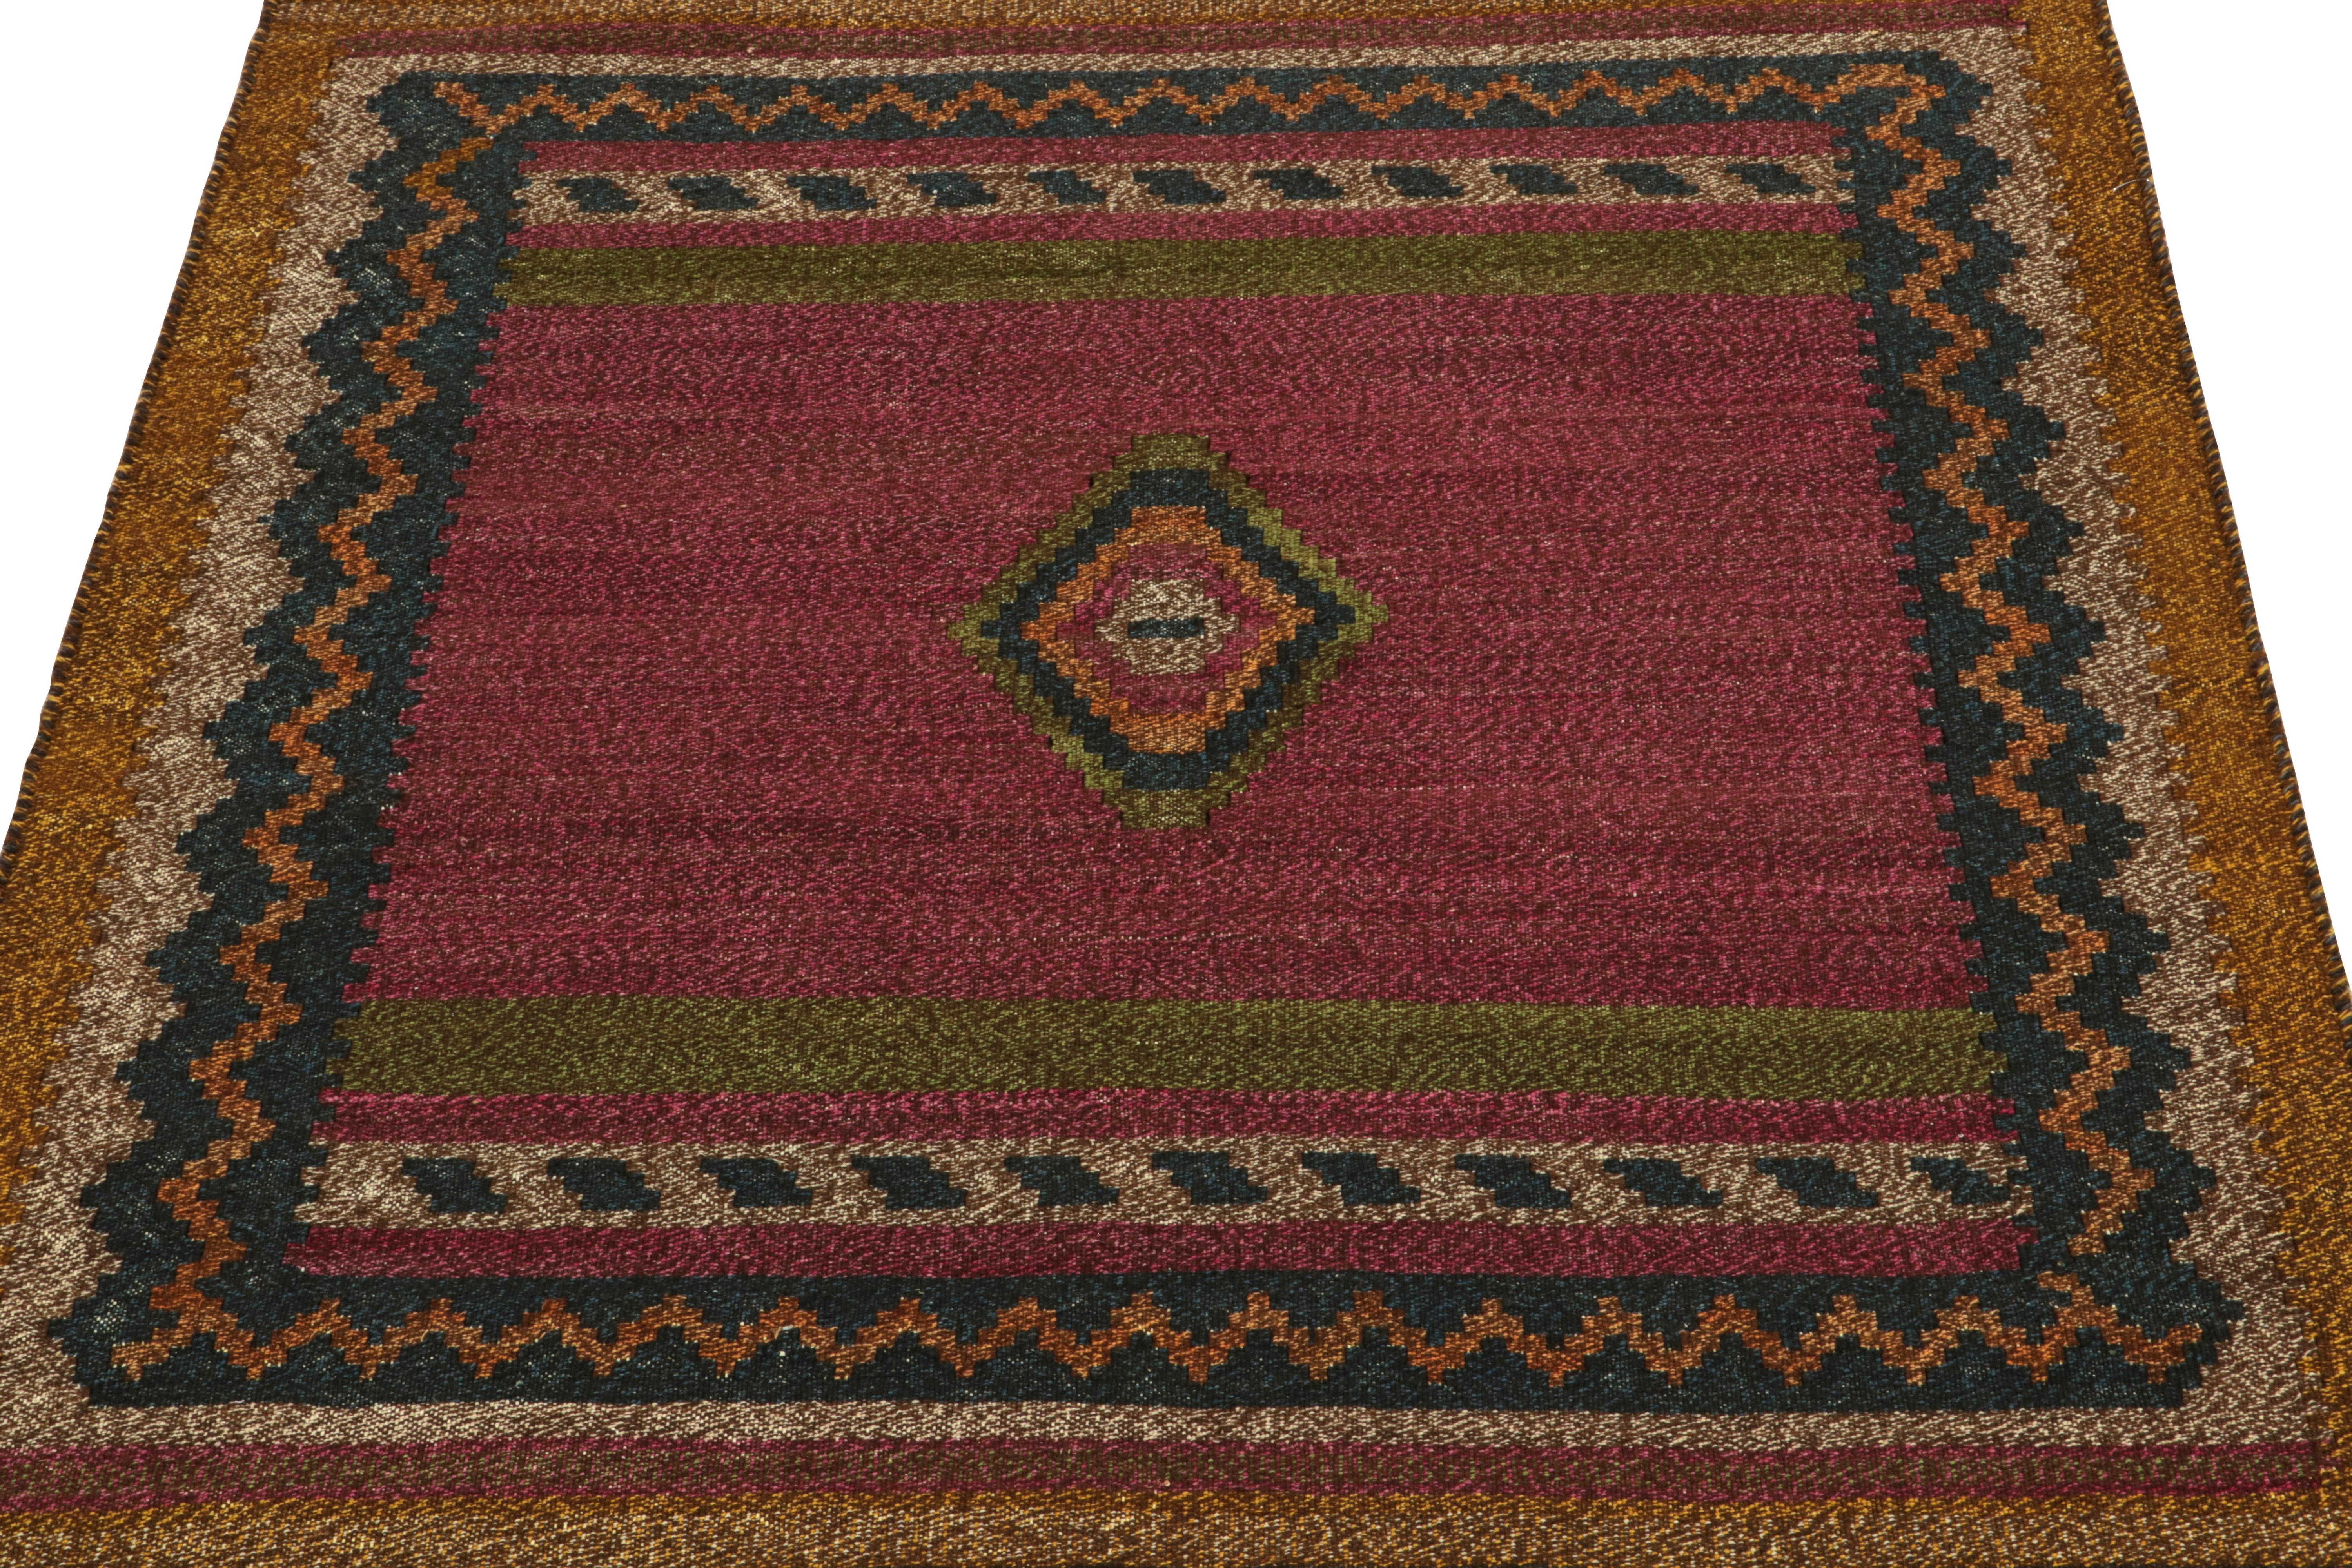 Originating circa 1980-1990, a rare vintage curation of small-sized Persian Sofreh Kilims our principal has newly acquired. Distinguished for both its square 4x4 scatter rug size and its durability among flat weaves of the period. 

This